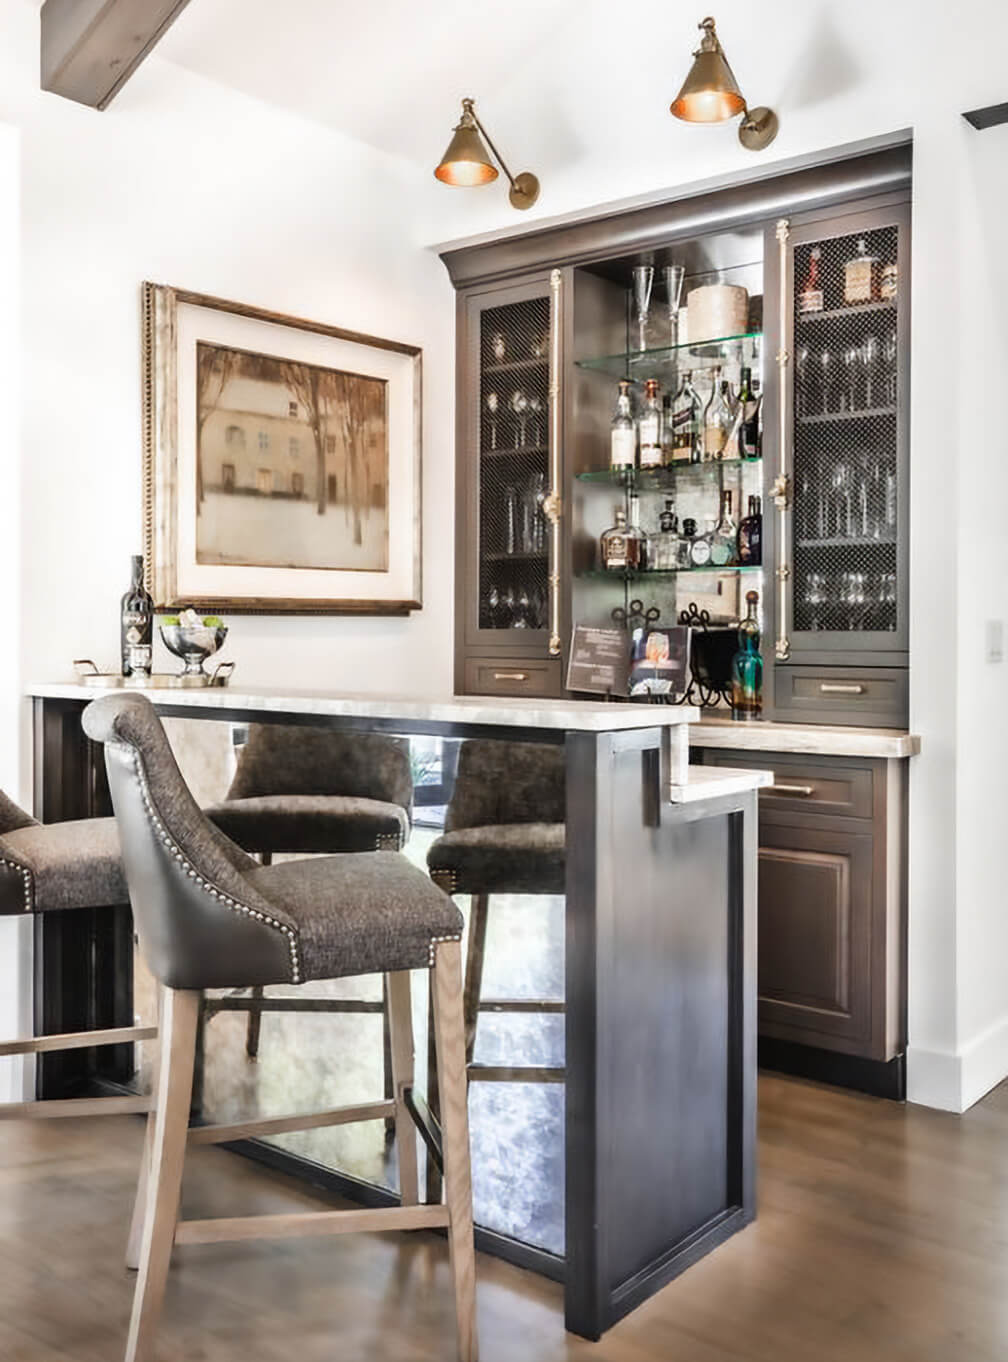 A beautiful home bar and wet bar space with wire mesh inserts on the display cabinets instead of traditional glass.